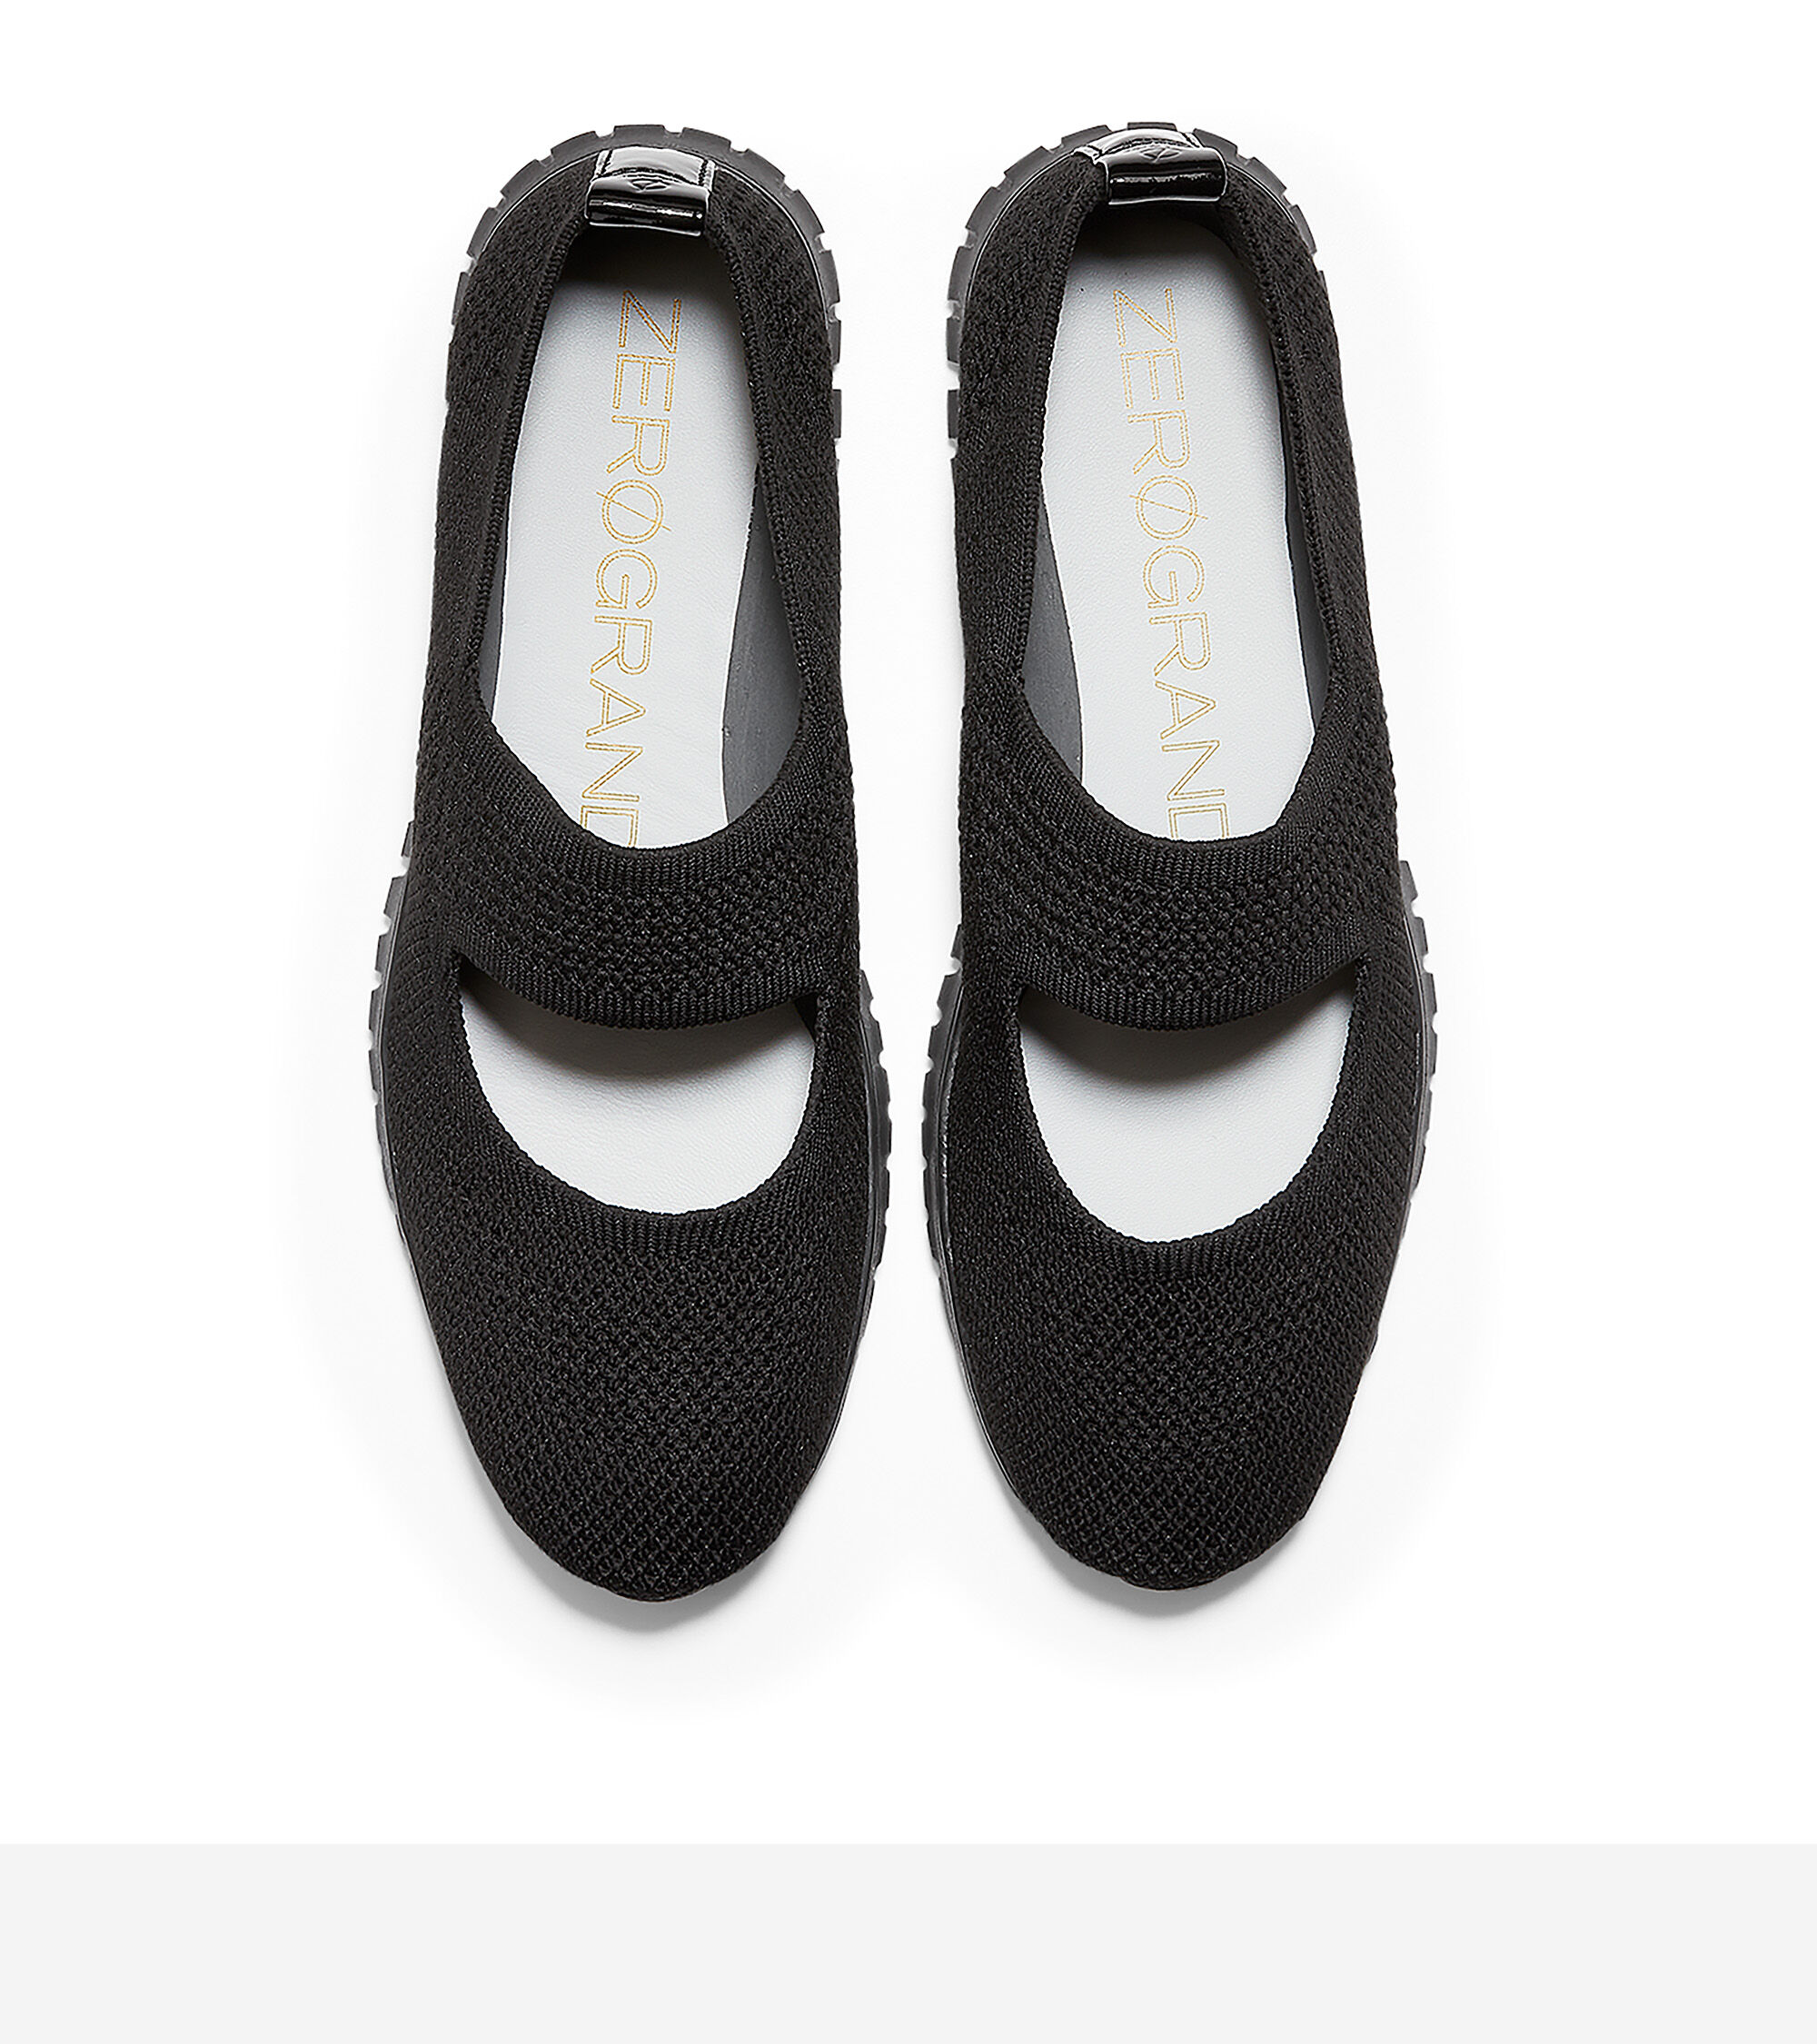 cole haan mary jane shoes